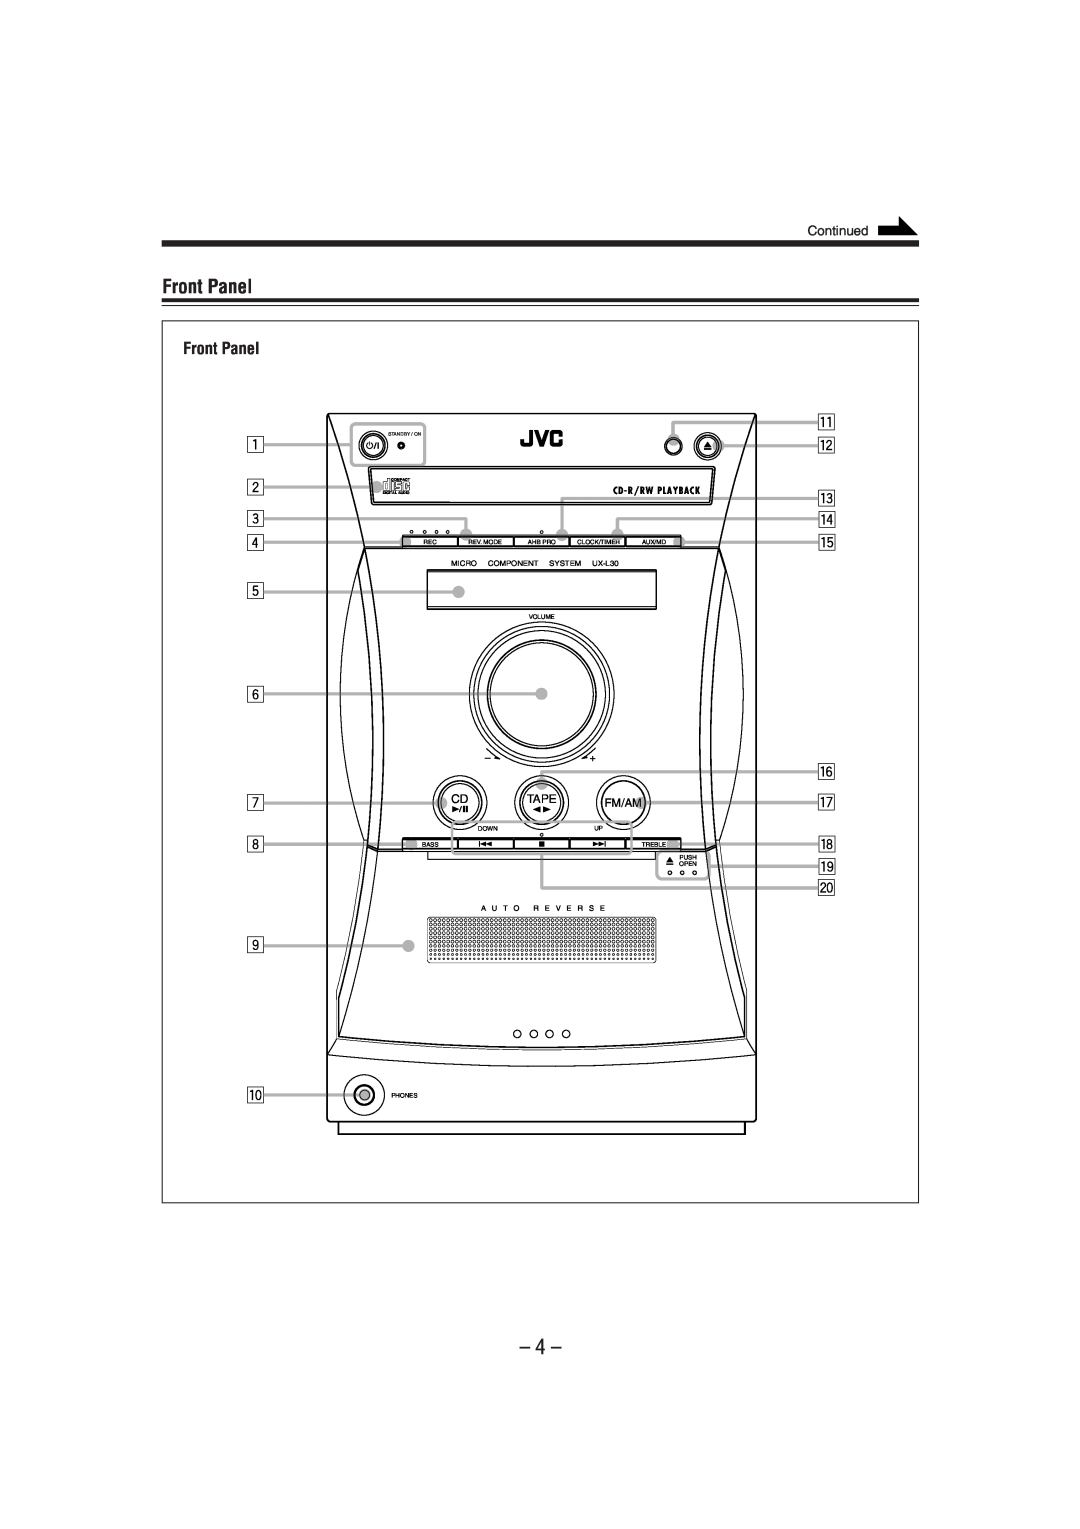 JVC manual Front Panel, 1 2 3, q w e r t y u i o, Tape, Fm/Am, Cd - R/Rw Playback, MICRO COMPONENT SYSTEM UX-L30 